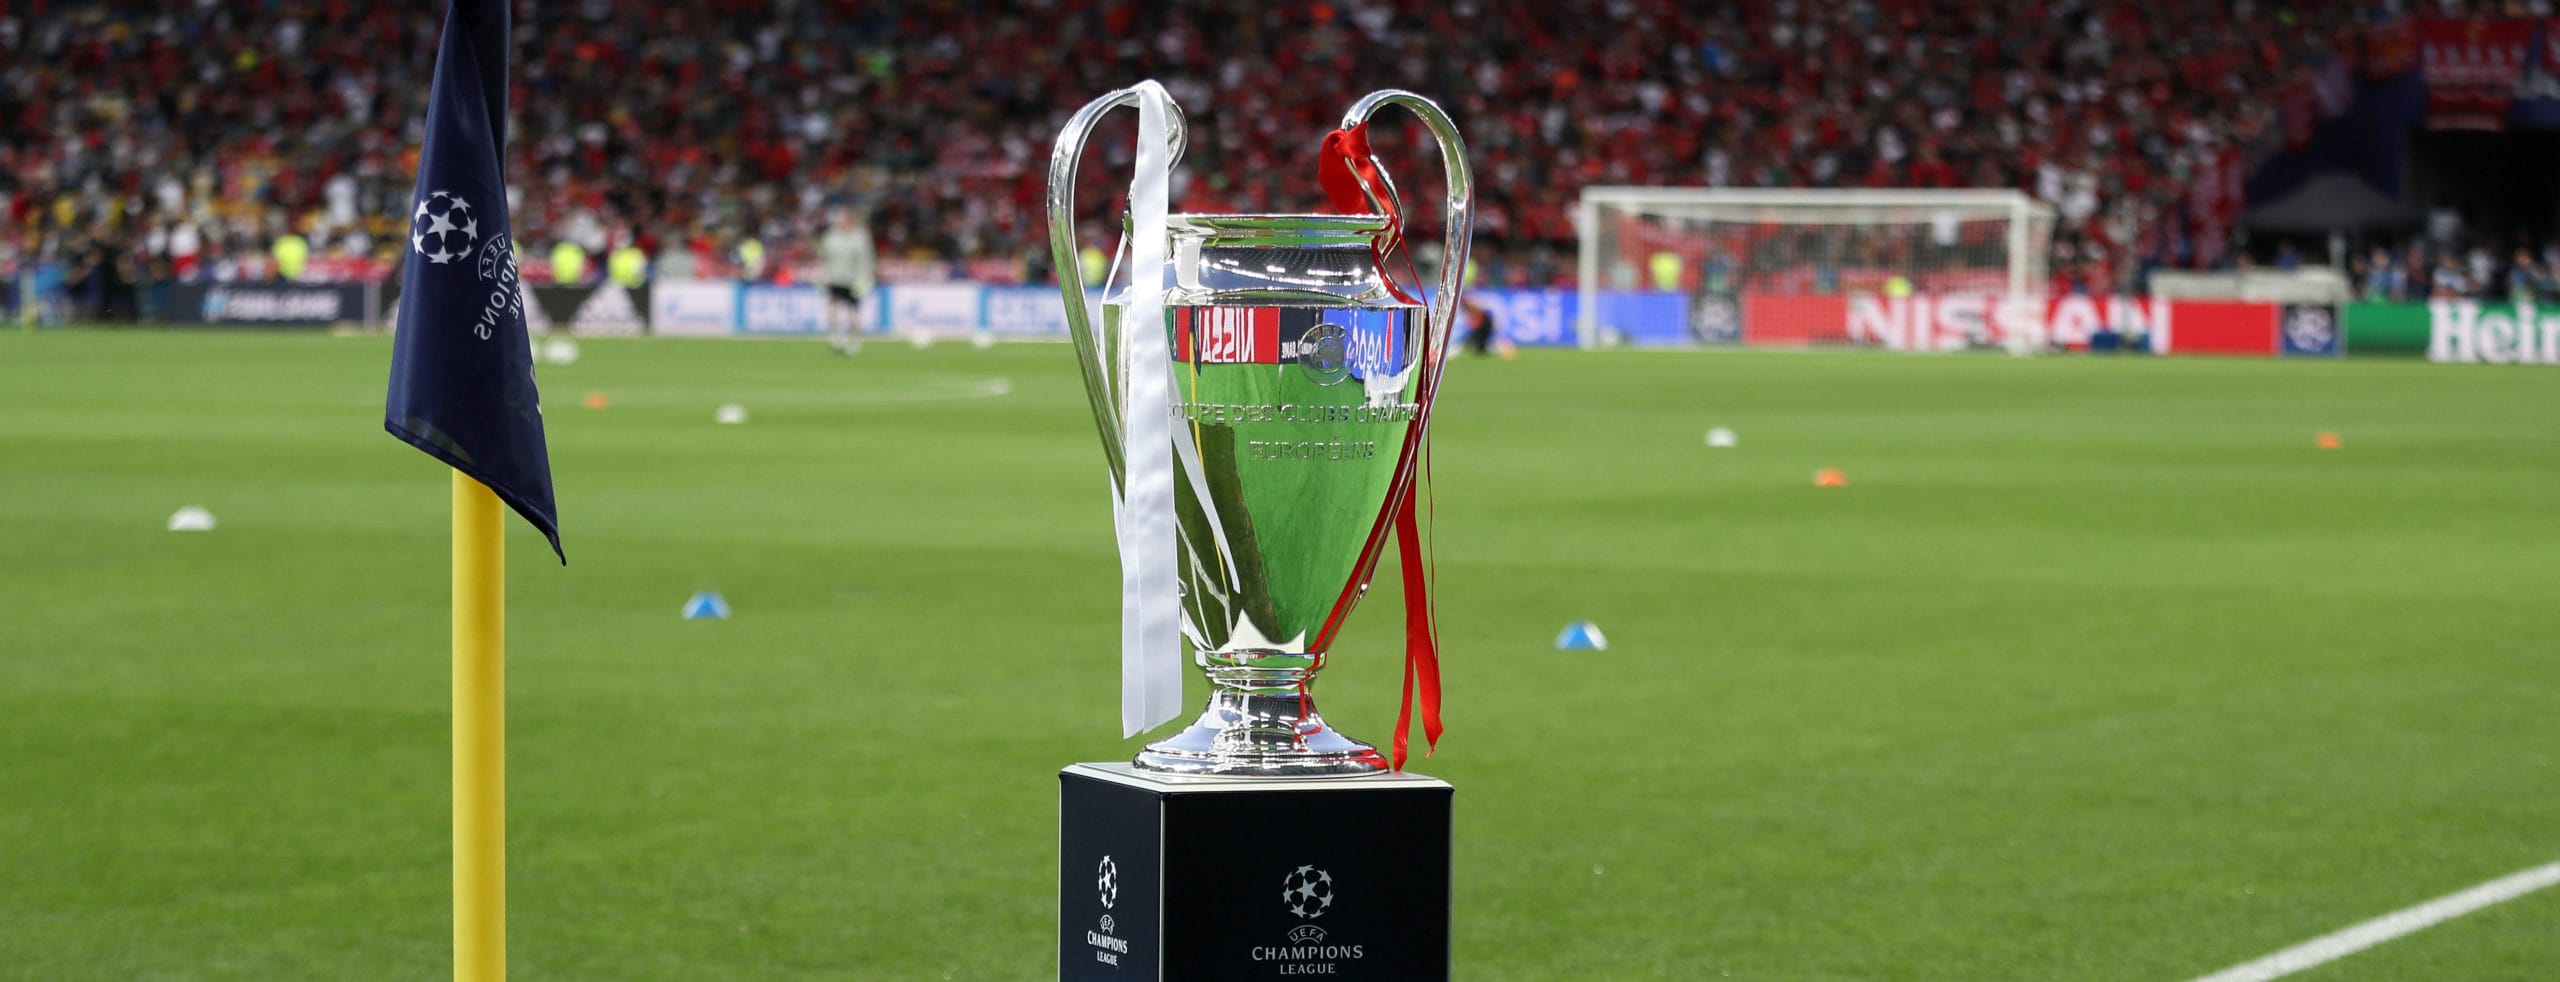 Champions League predictions & tips: Leipzig & Real Madrid to draw